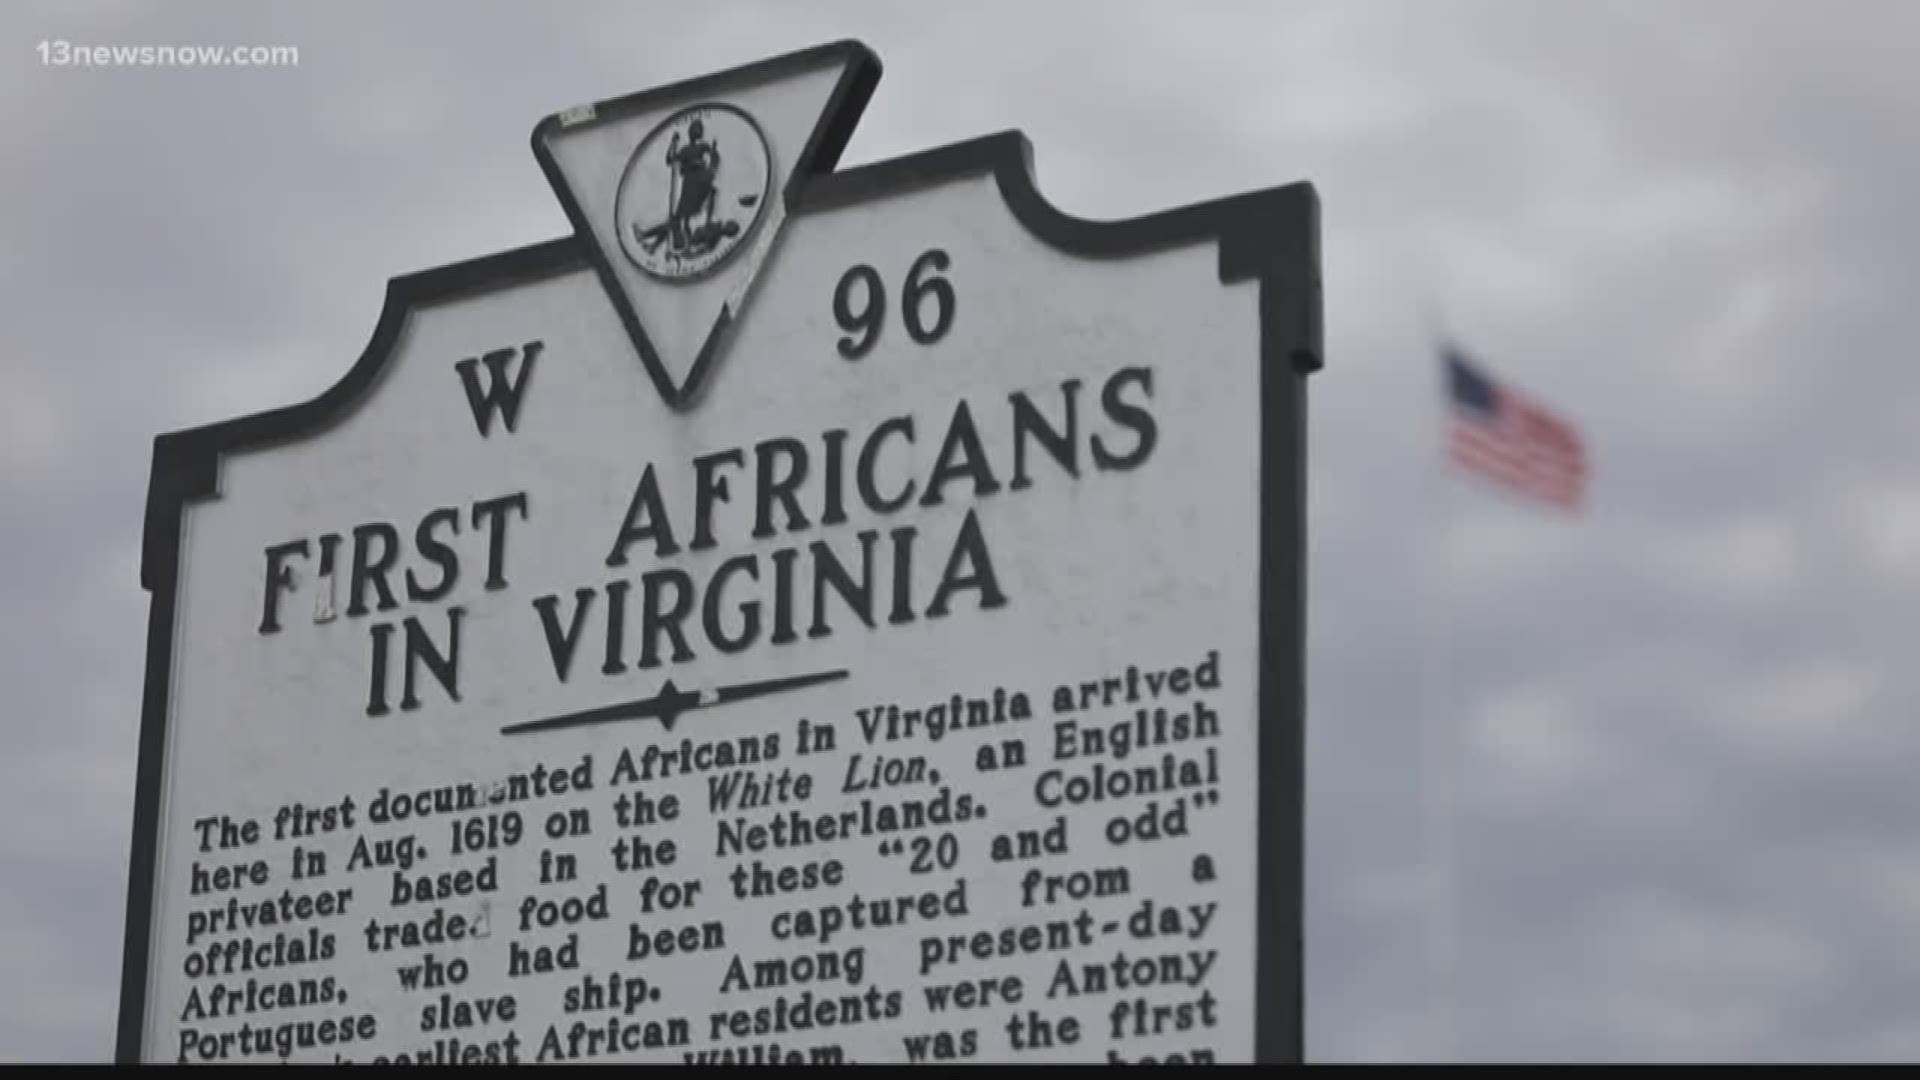 The first Africans arrived in English North America on a ship called the White Lion. The journey brought them to Point Comfort where the city of Hampton now sits.